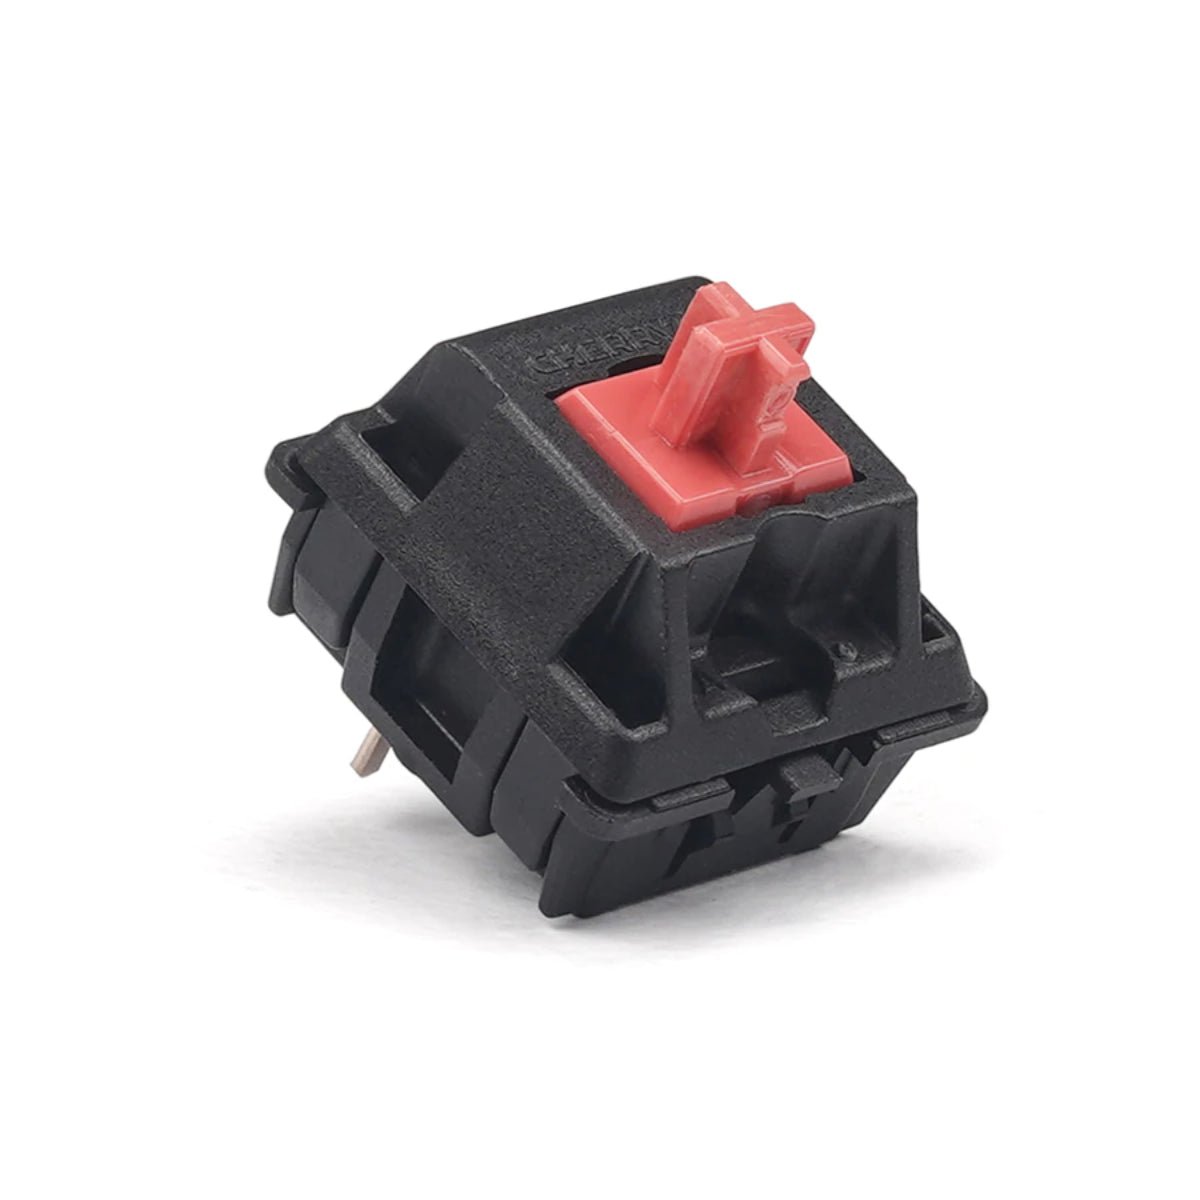 KBD Fans Cherry MX Hyperglide Switches - Silent Red - Store 974 | ستور ٩٧٤